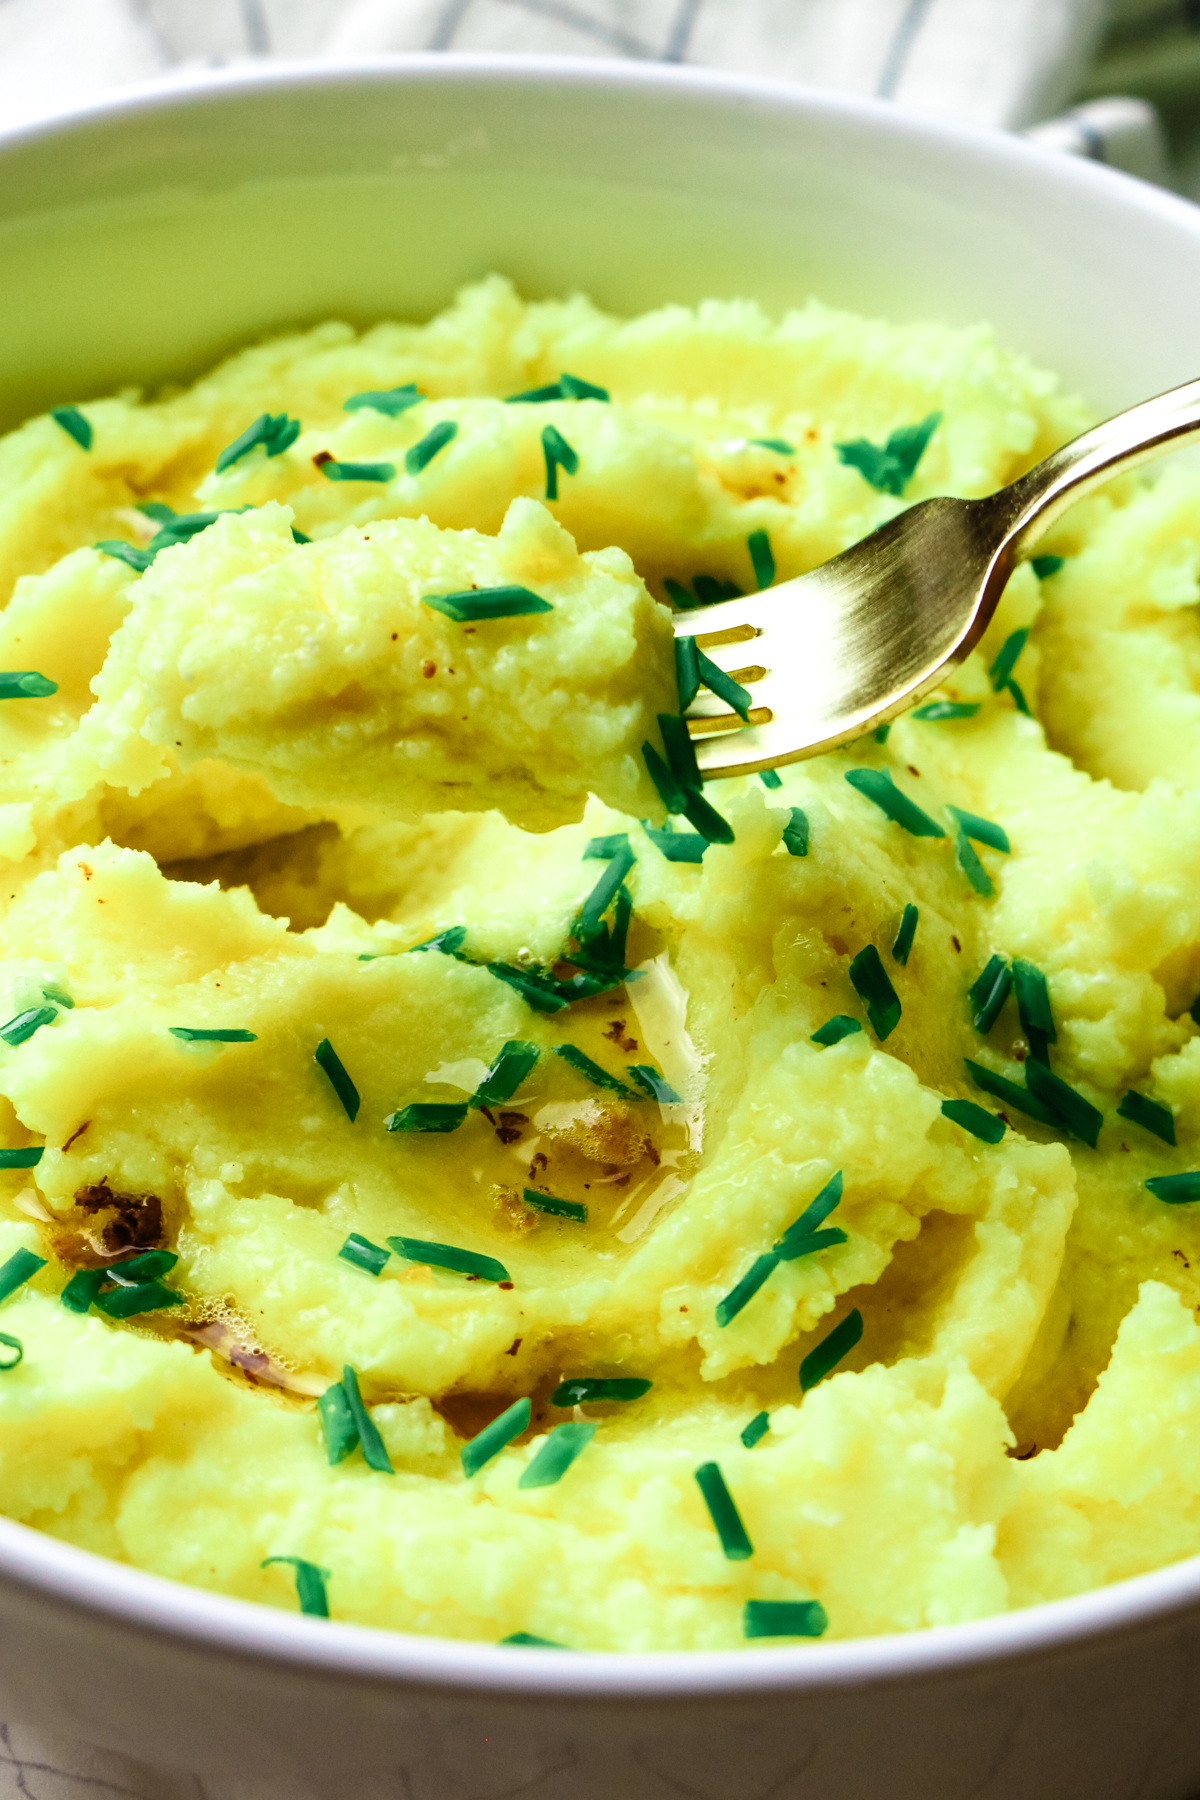 mashed potatoes with fresh chives and a fork.